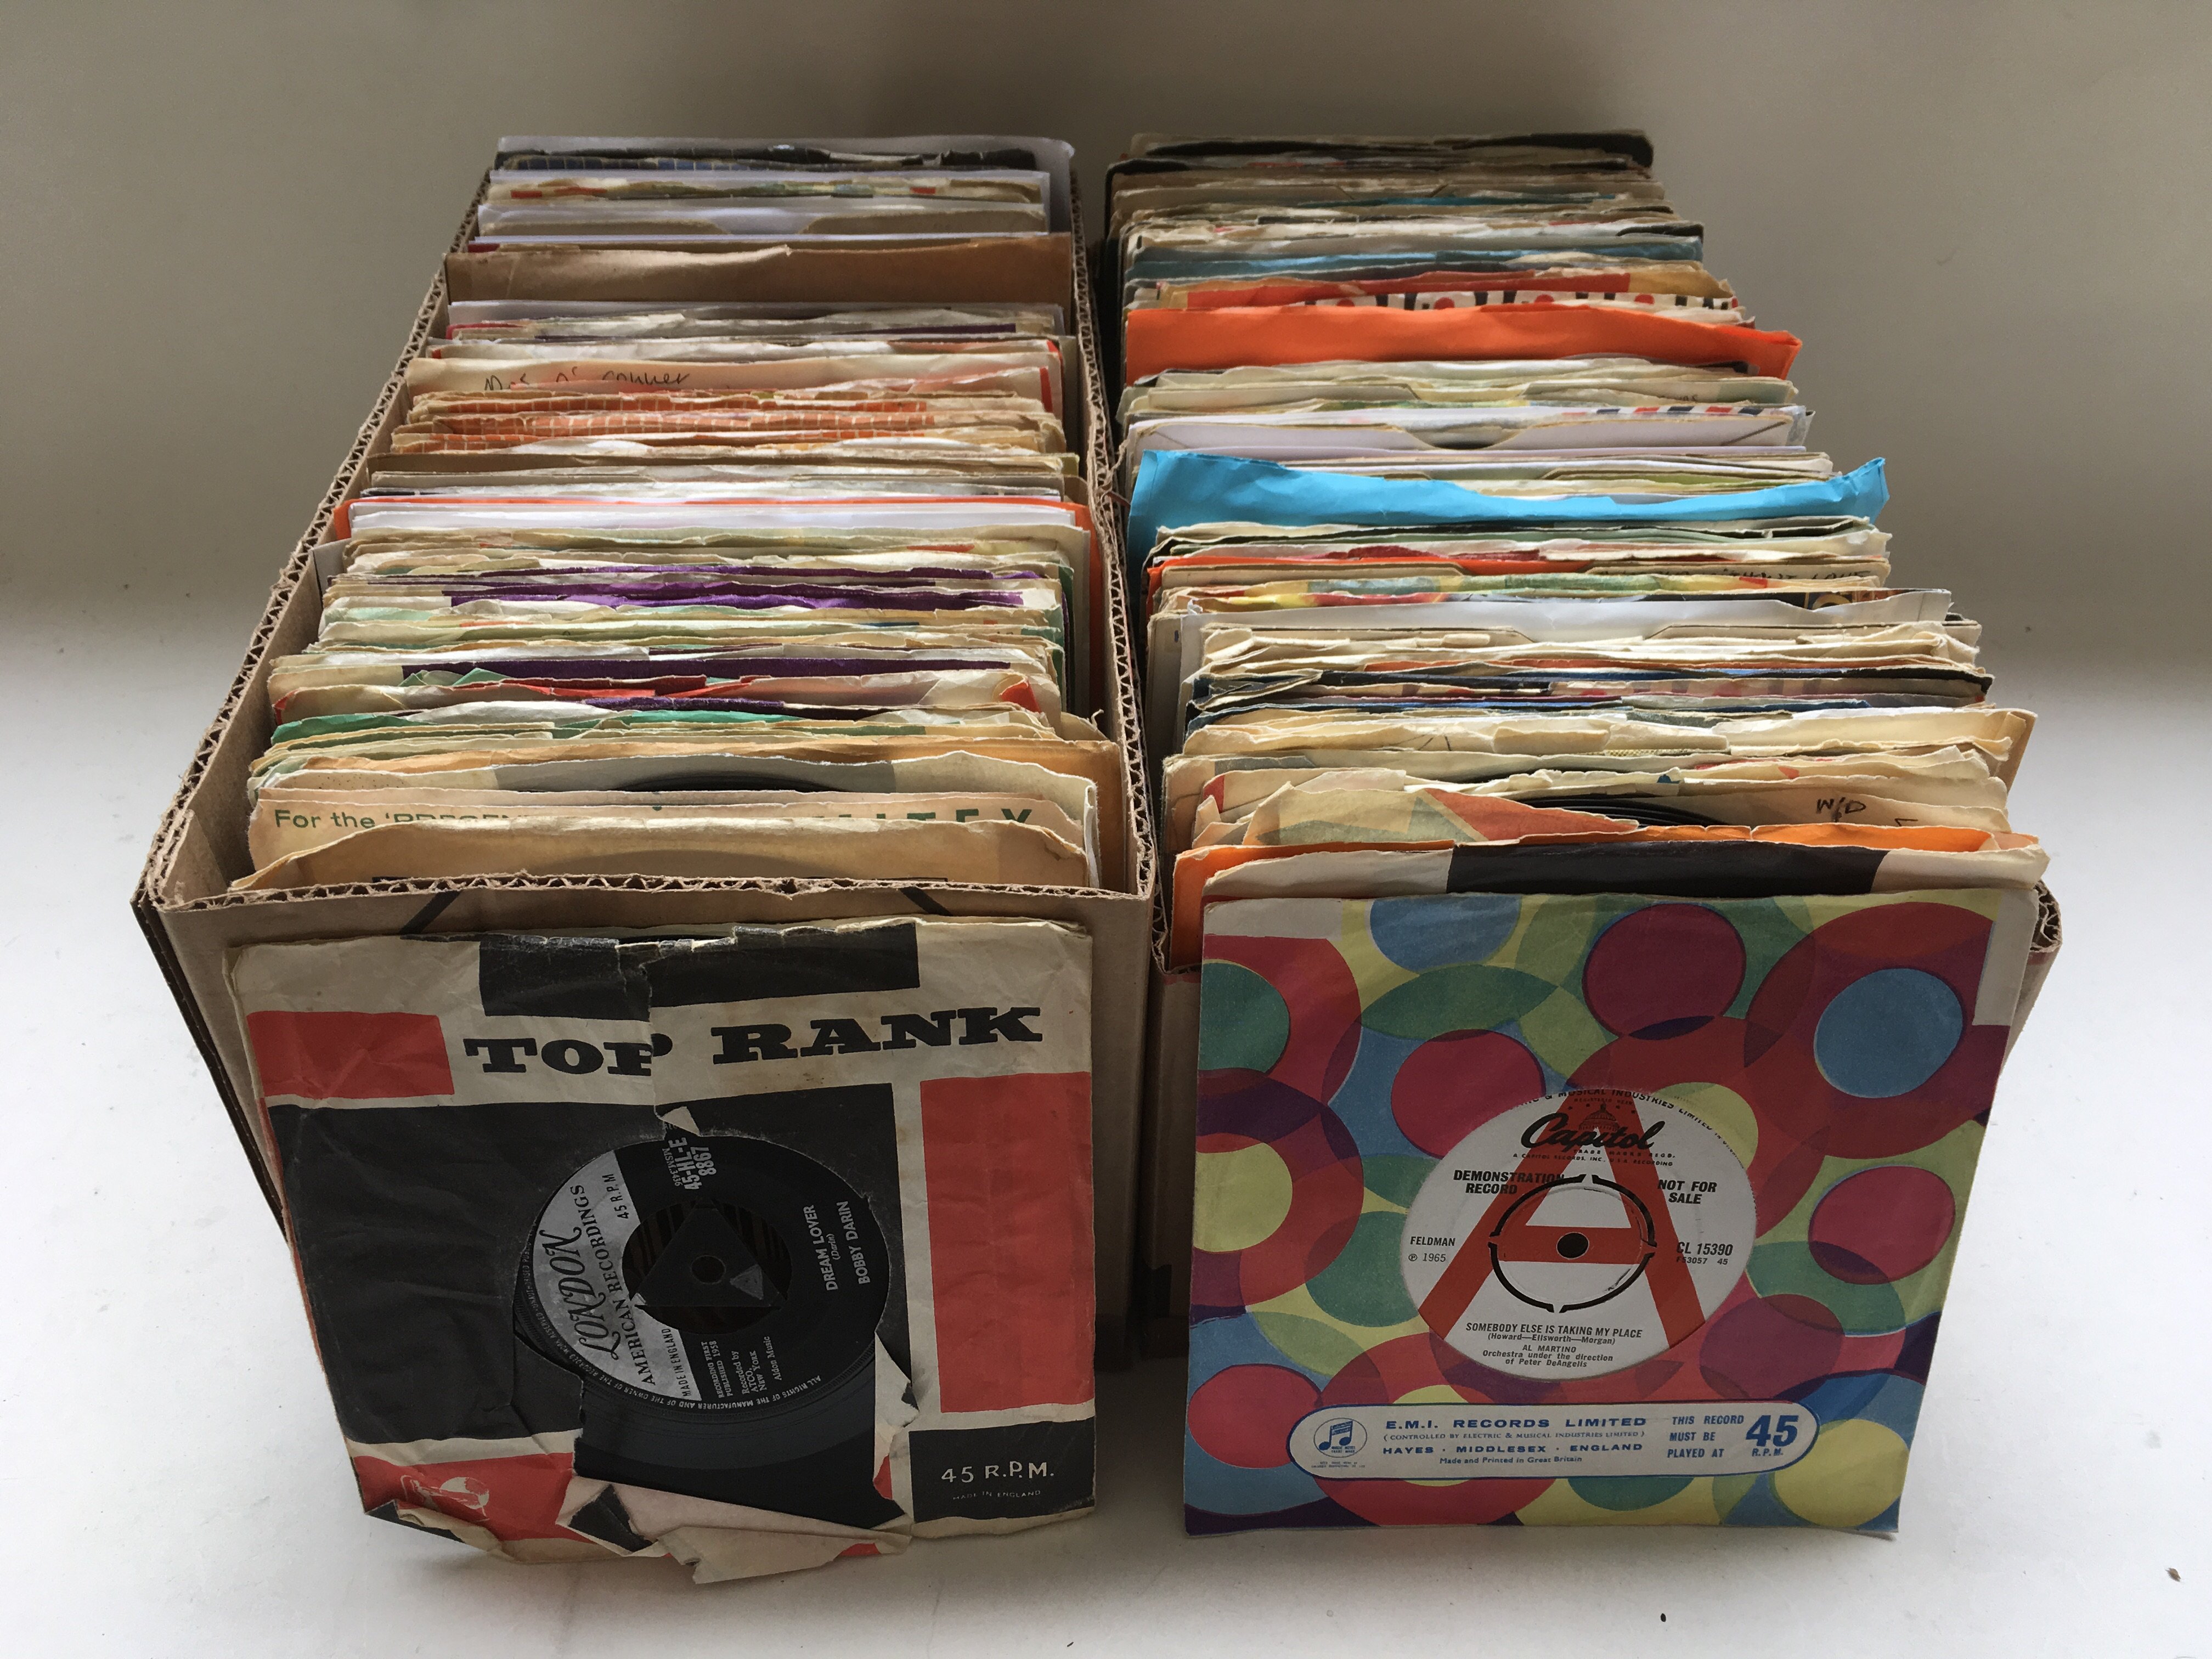 Two boxes of 7 inch singles by various artists fro